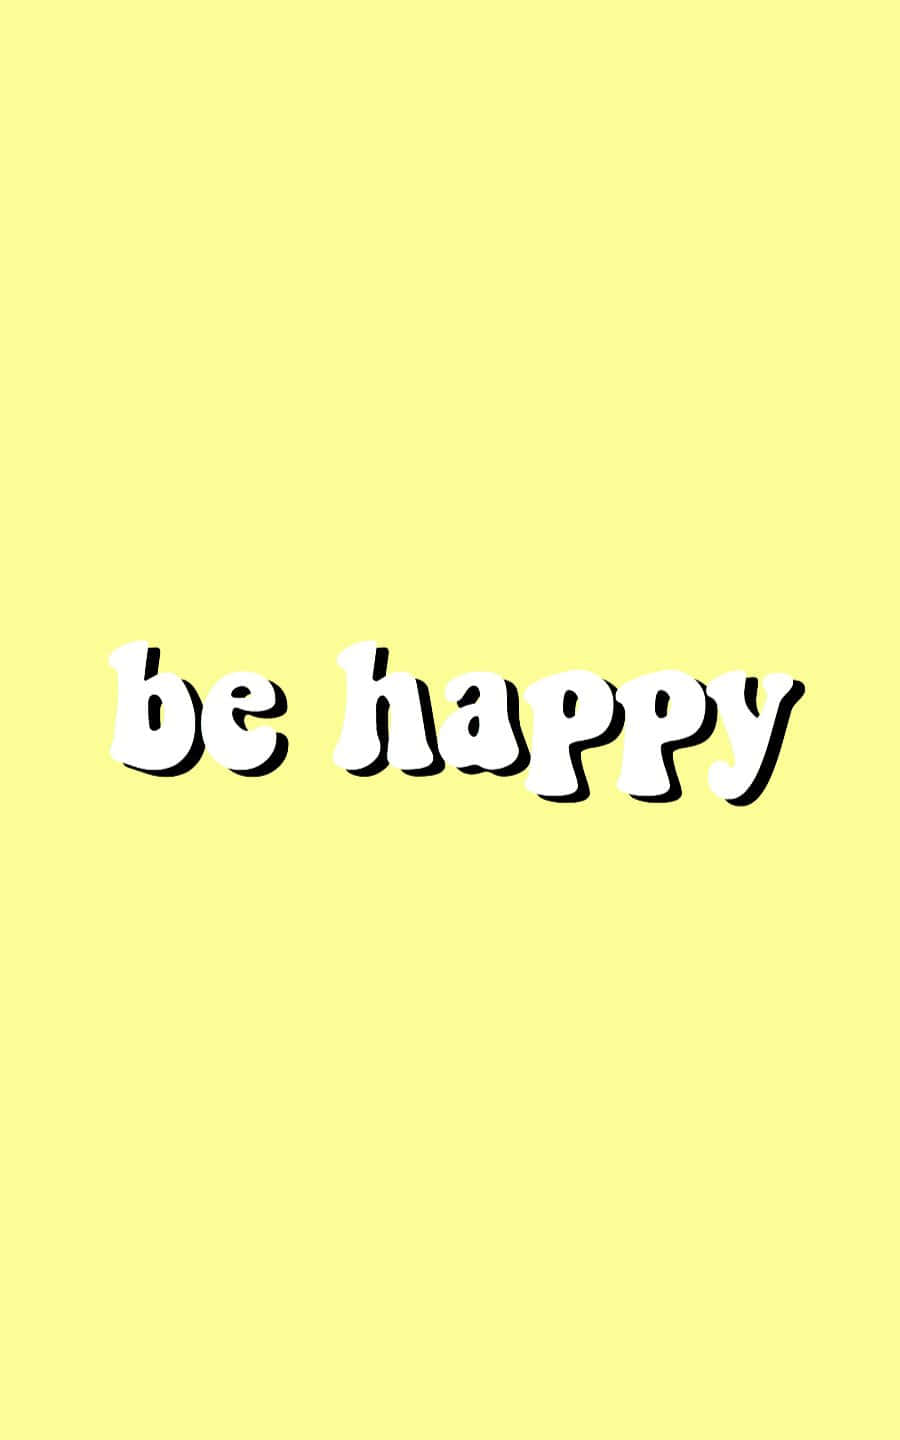 Be happy, stay positive Wallpaper